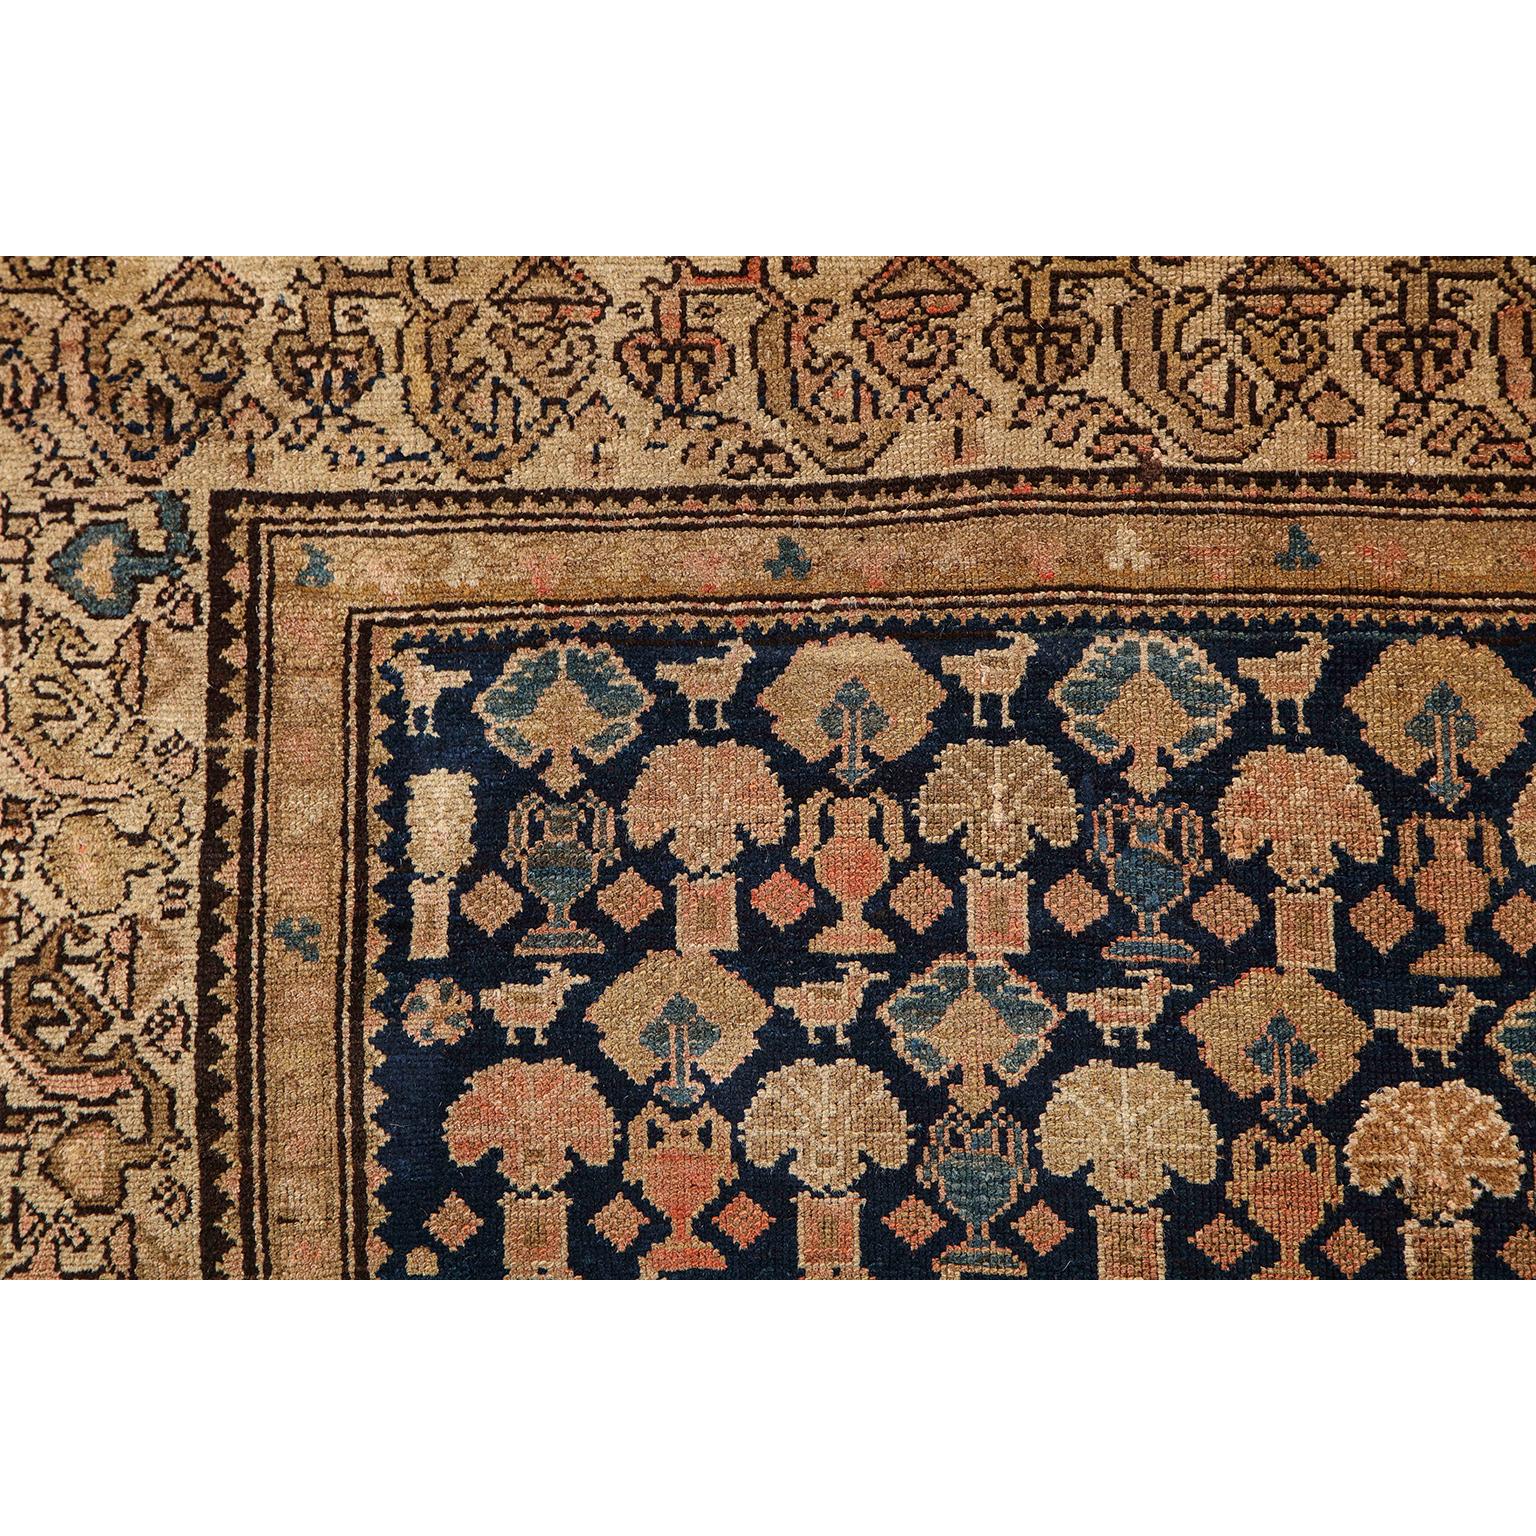 Antique 1900s Persian Malayer Rug, Flower Motifs, 5' x 7' For Sale 1